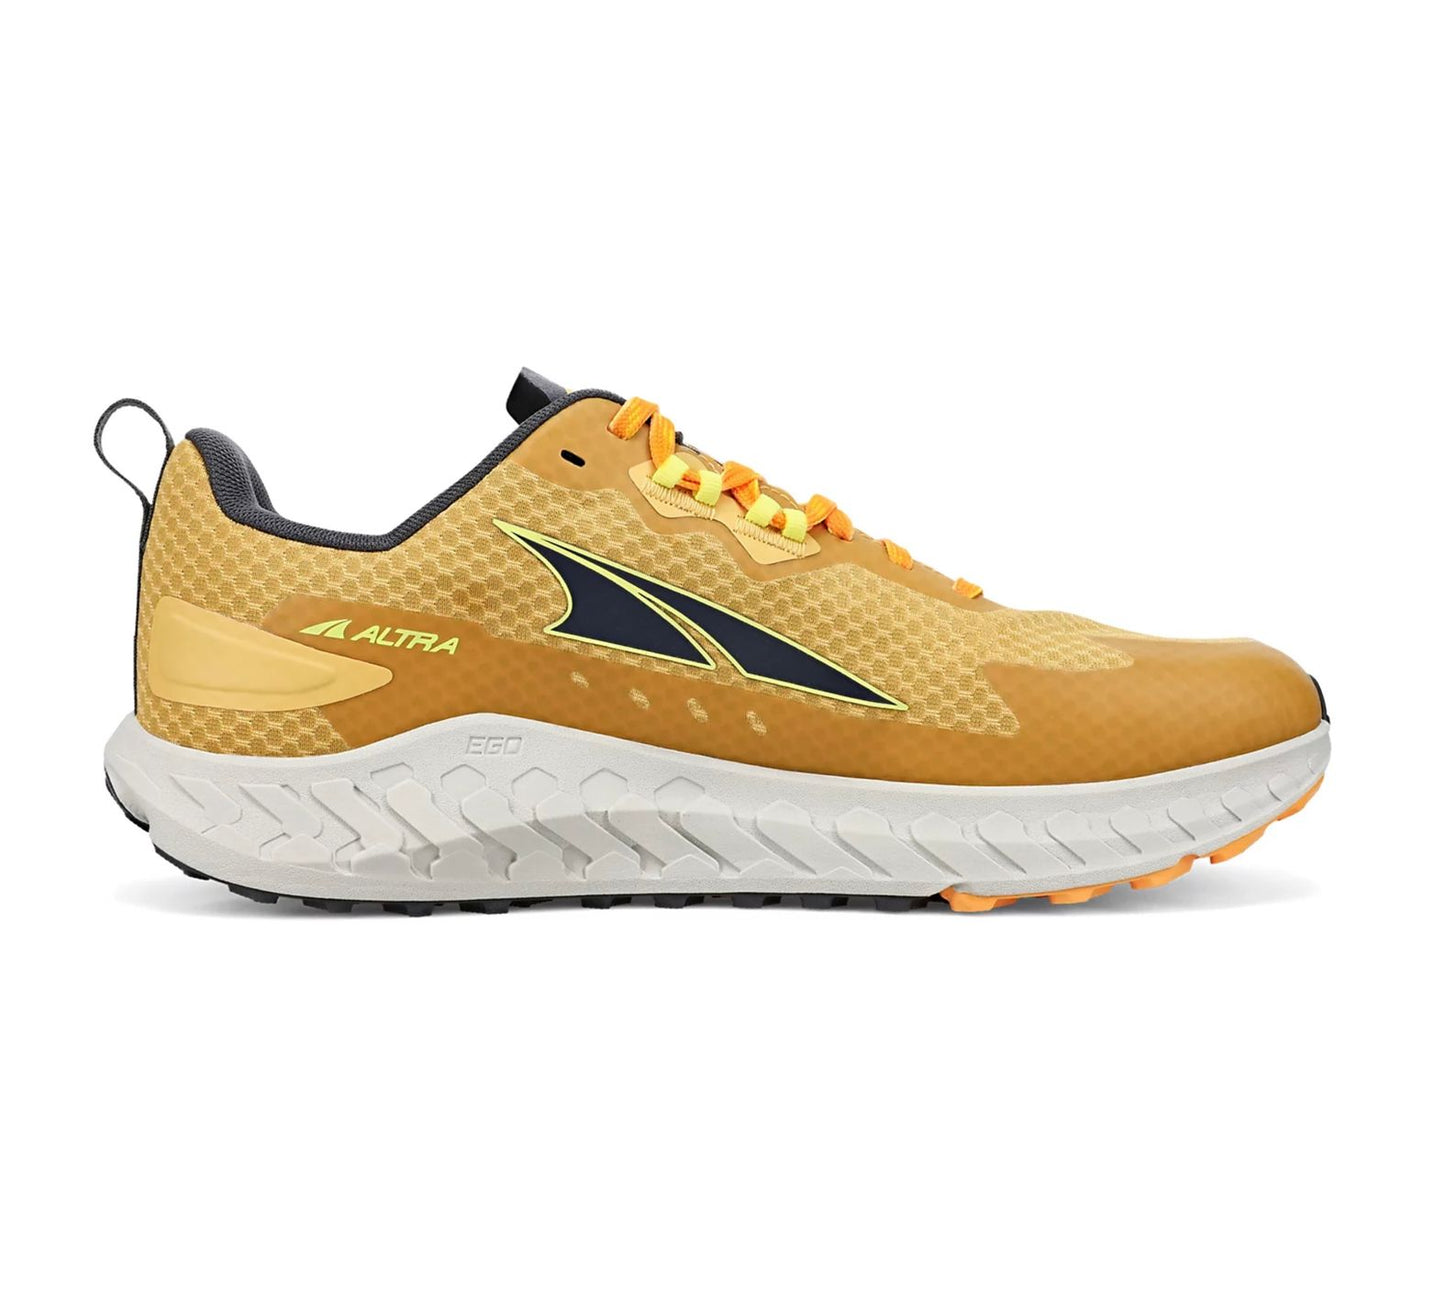 OUTROAD TRAIL RUNNING SHOE